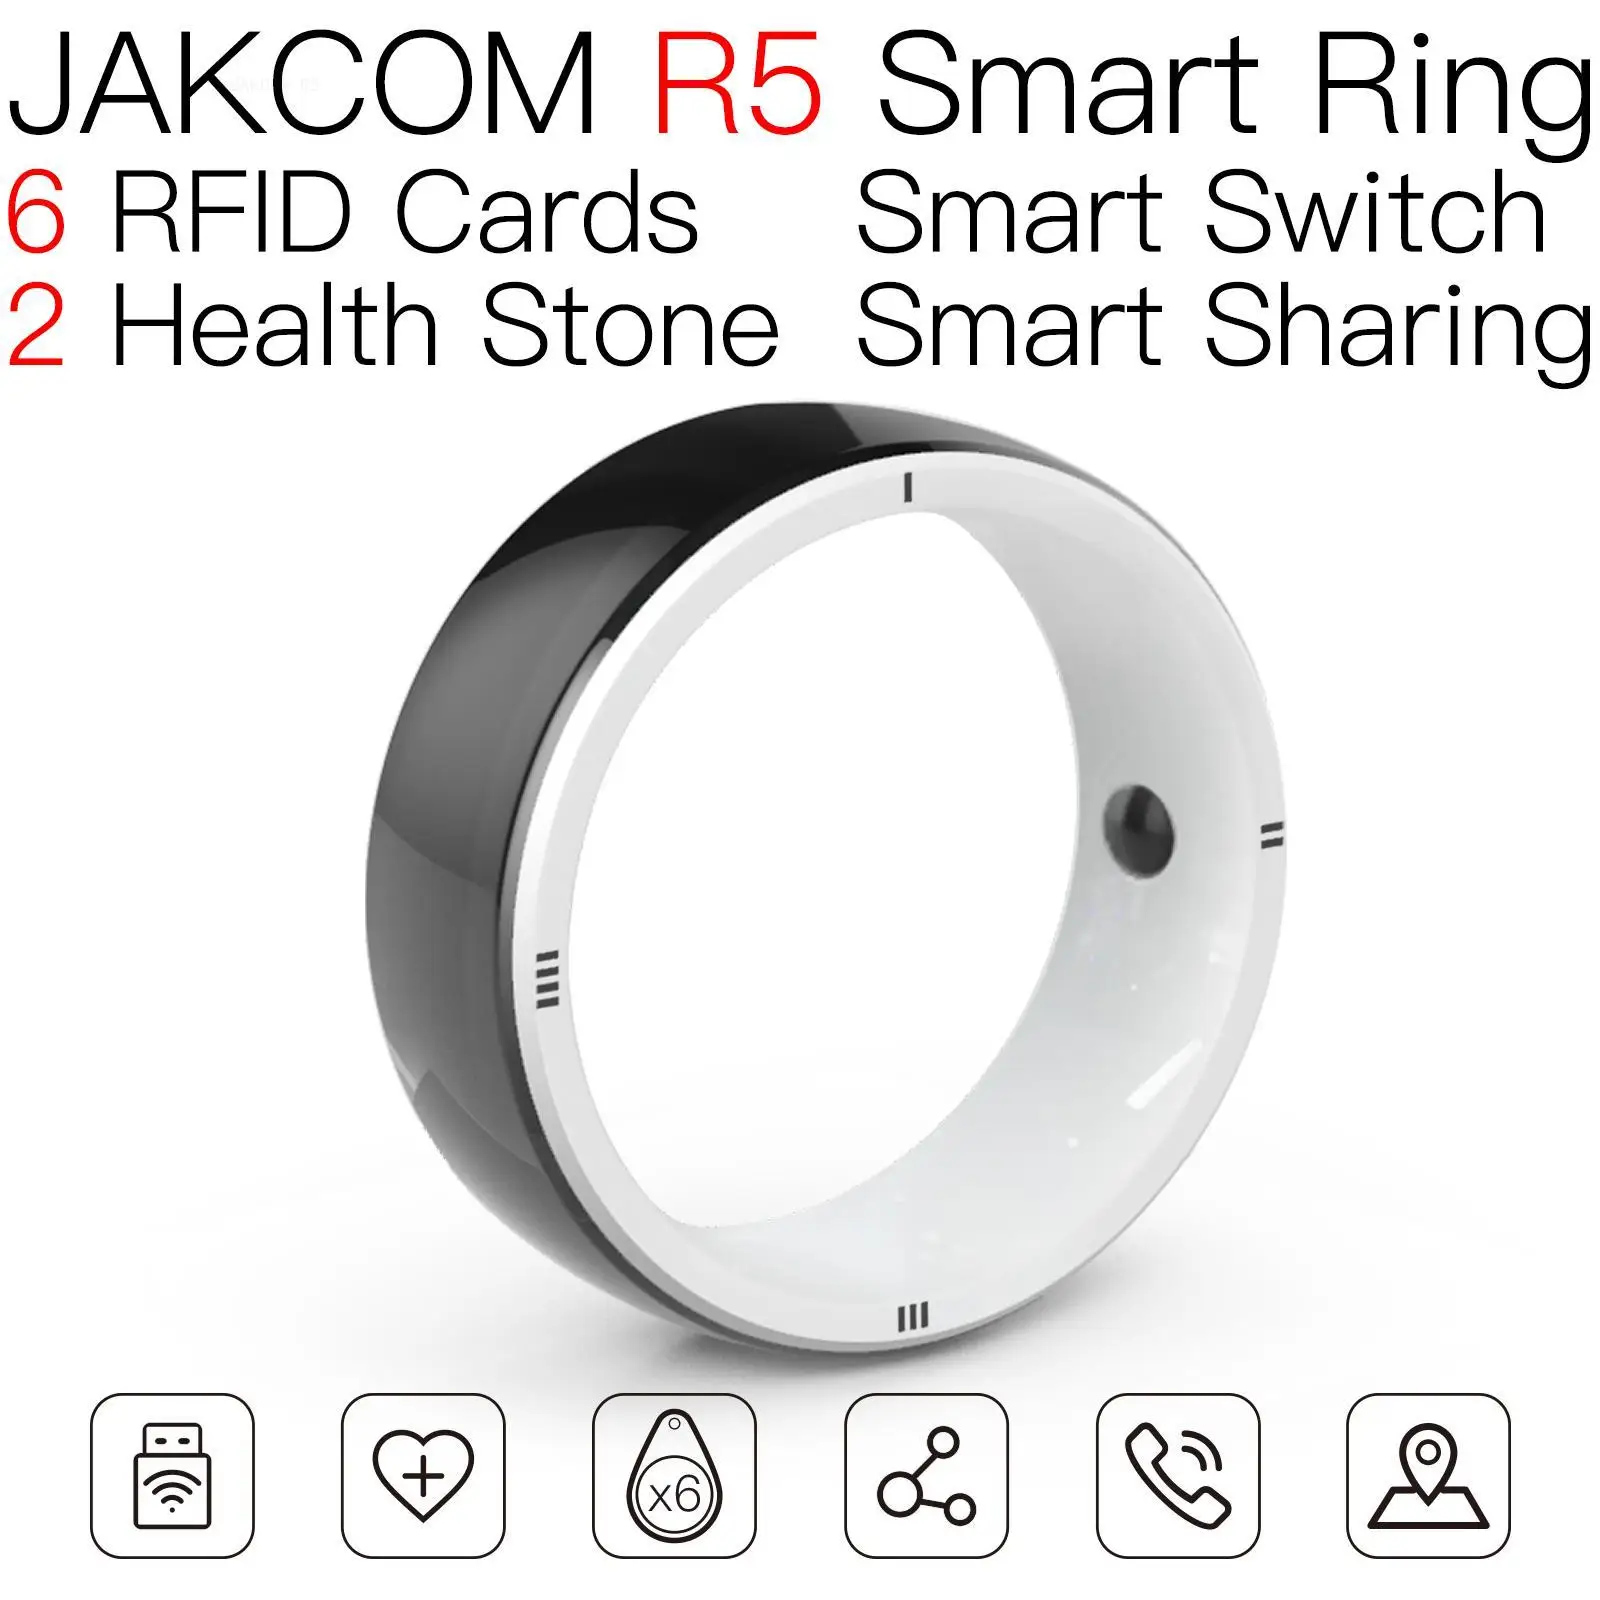 

JAKCOM R5 Smart Ring Super value as rfid tag 125khz key copy rewritable cards nfc for t5577 mini uhf module well booger